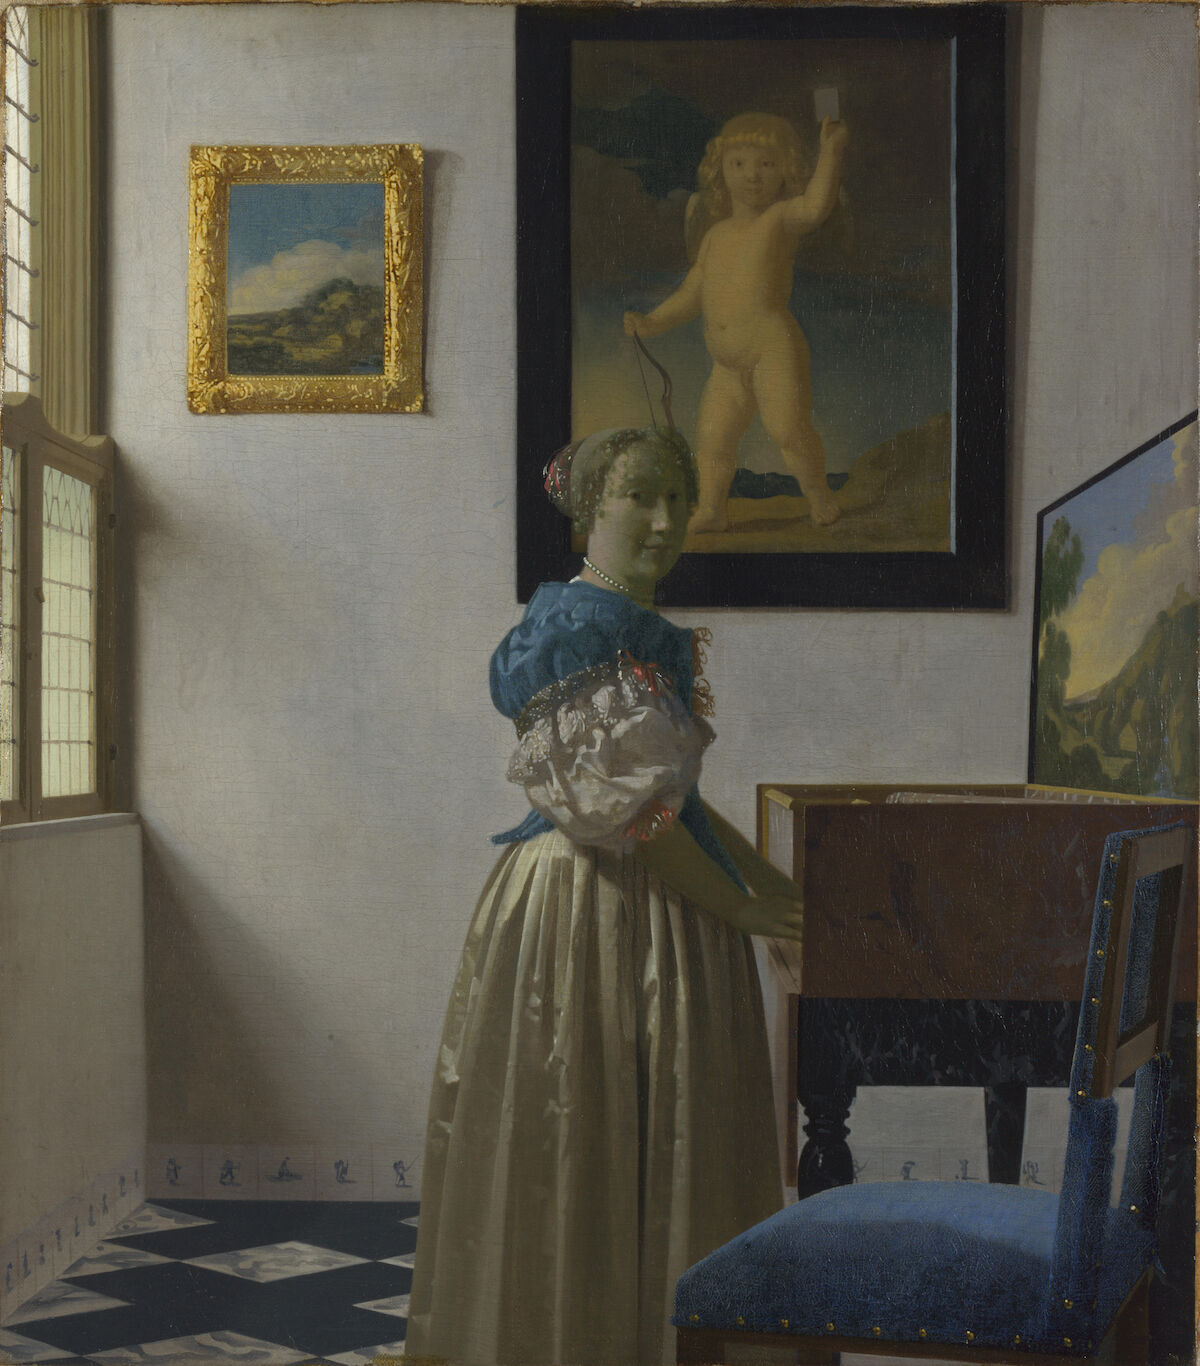 Vermeer, A Lady Standing at a Virginal, 1670–72. National Gallery, London. Via Wikimedia Commons.